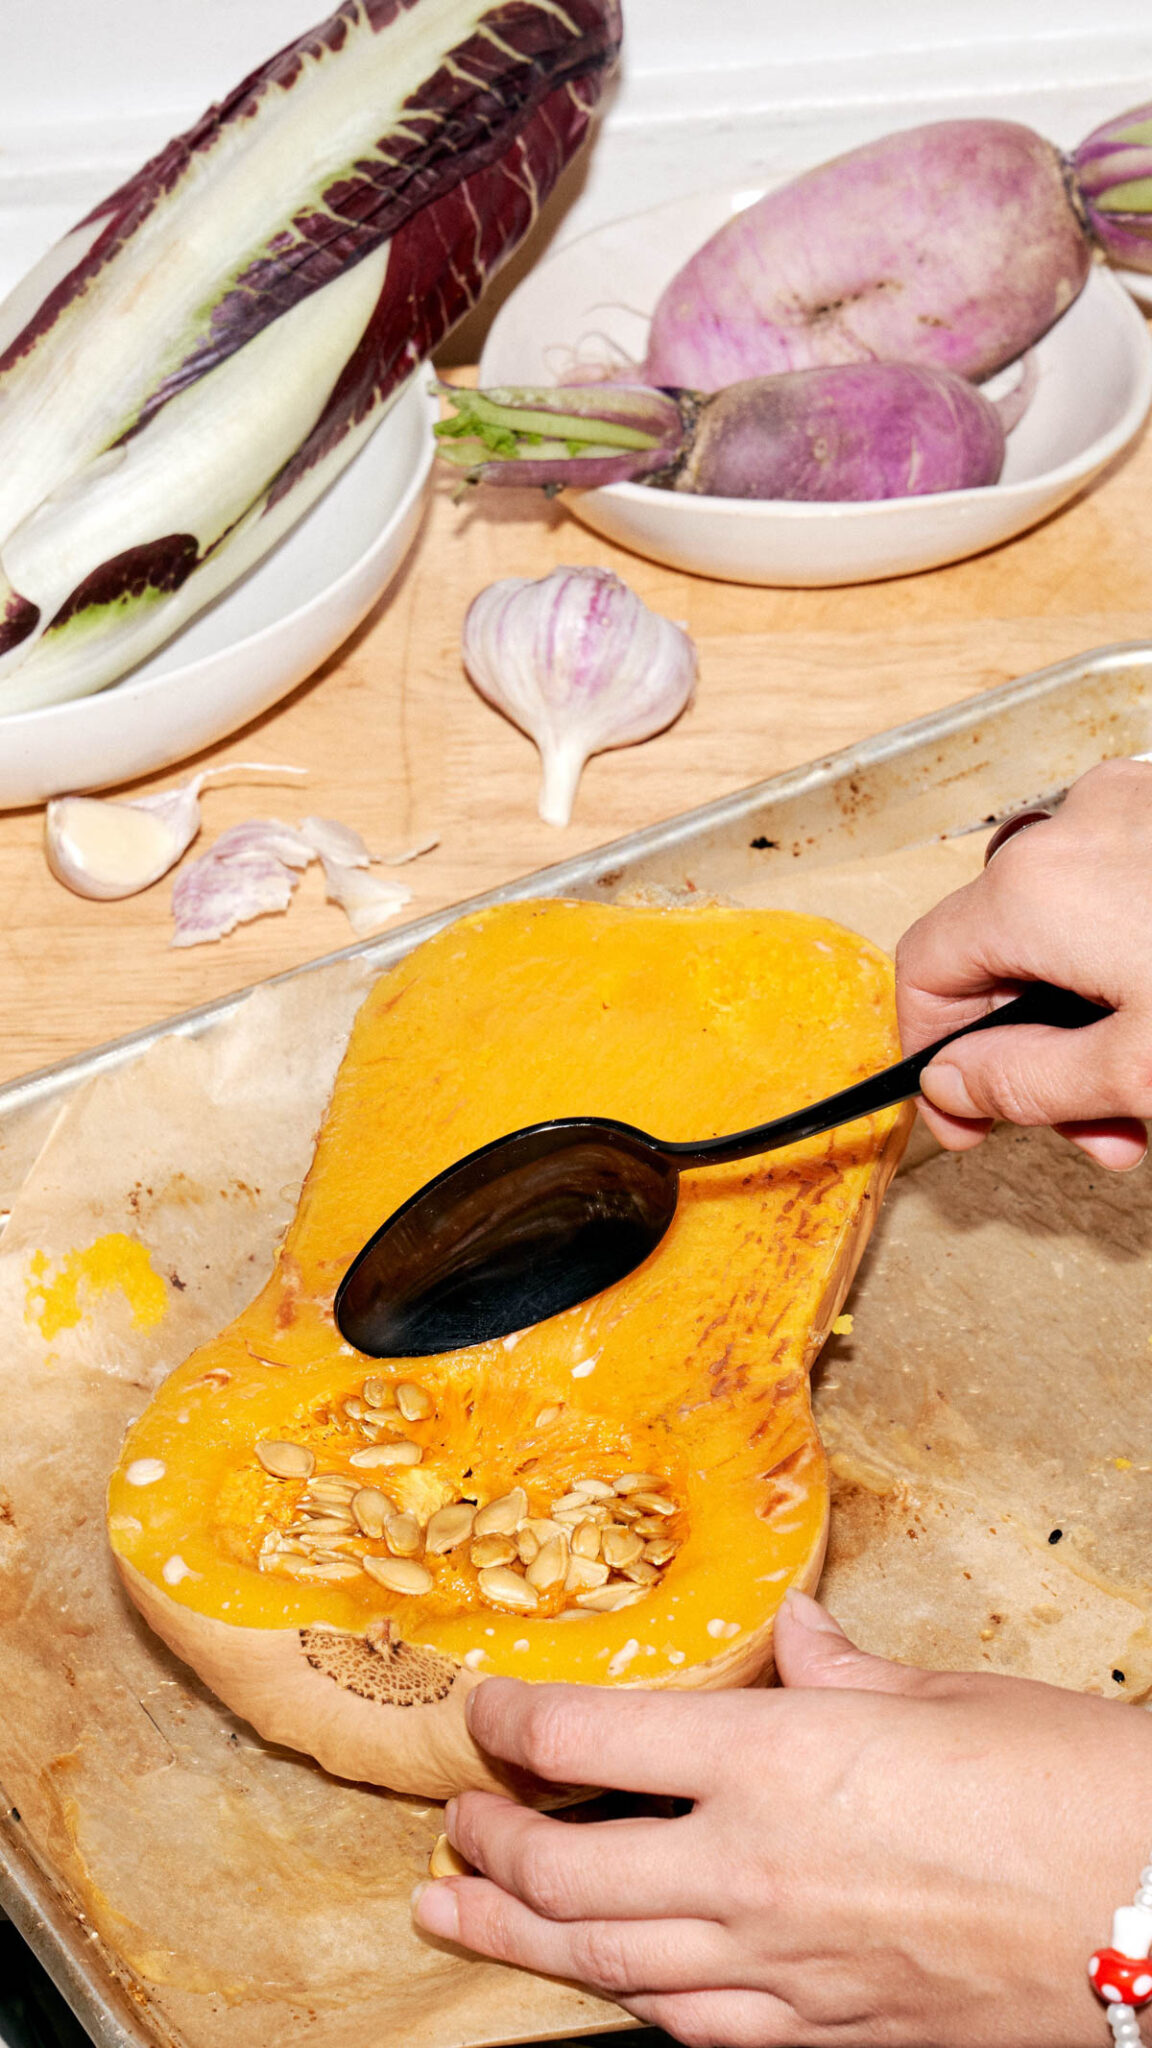 A spoon scooping out the flesh of a cooked butternut squash